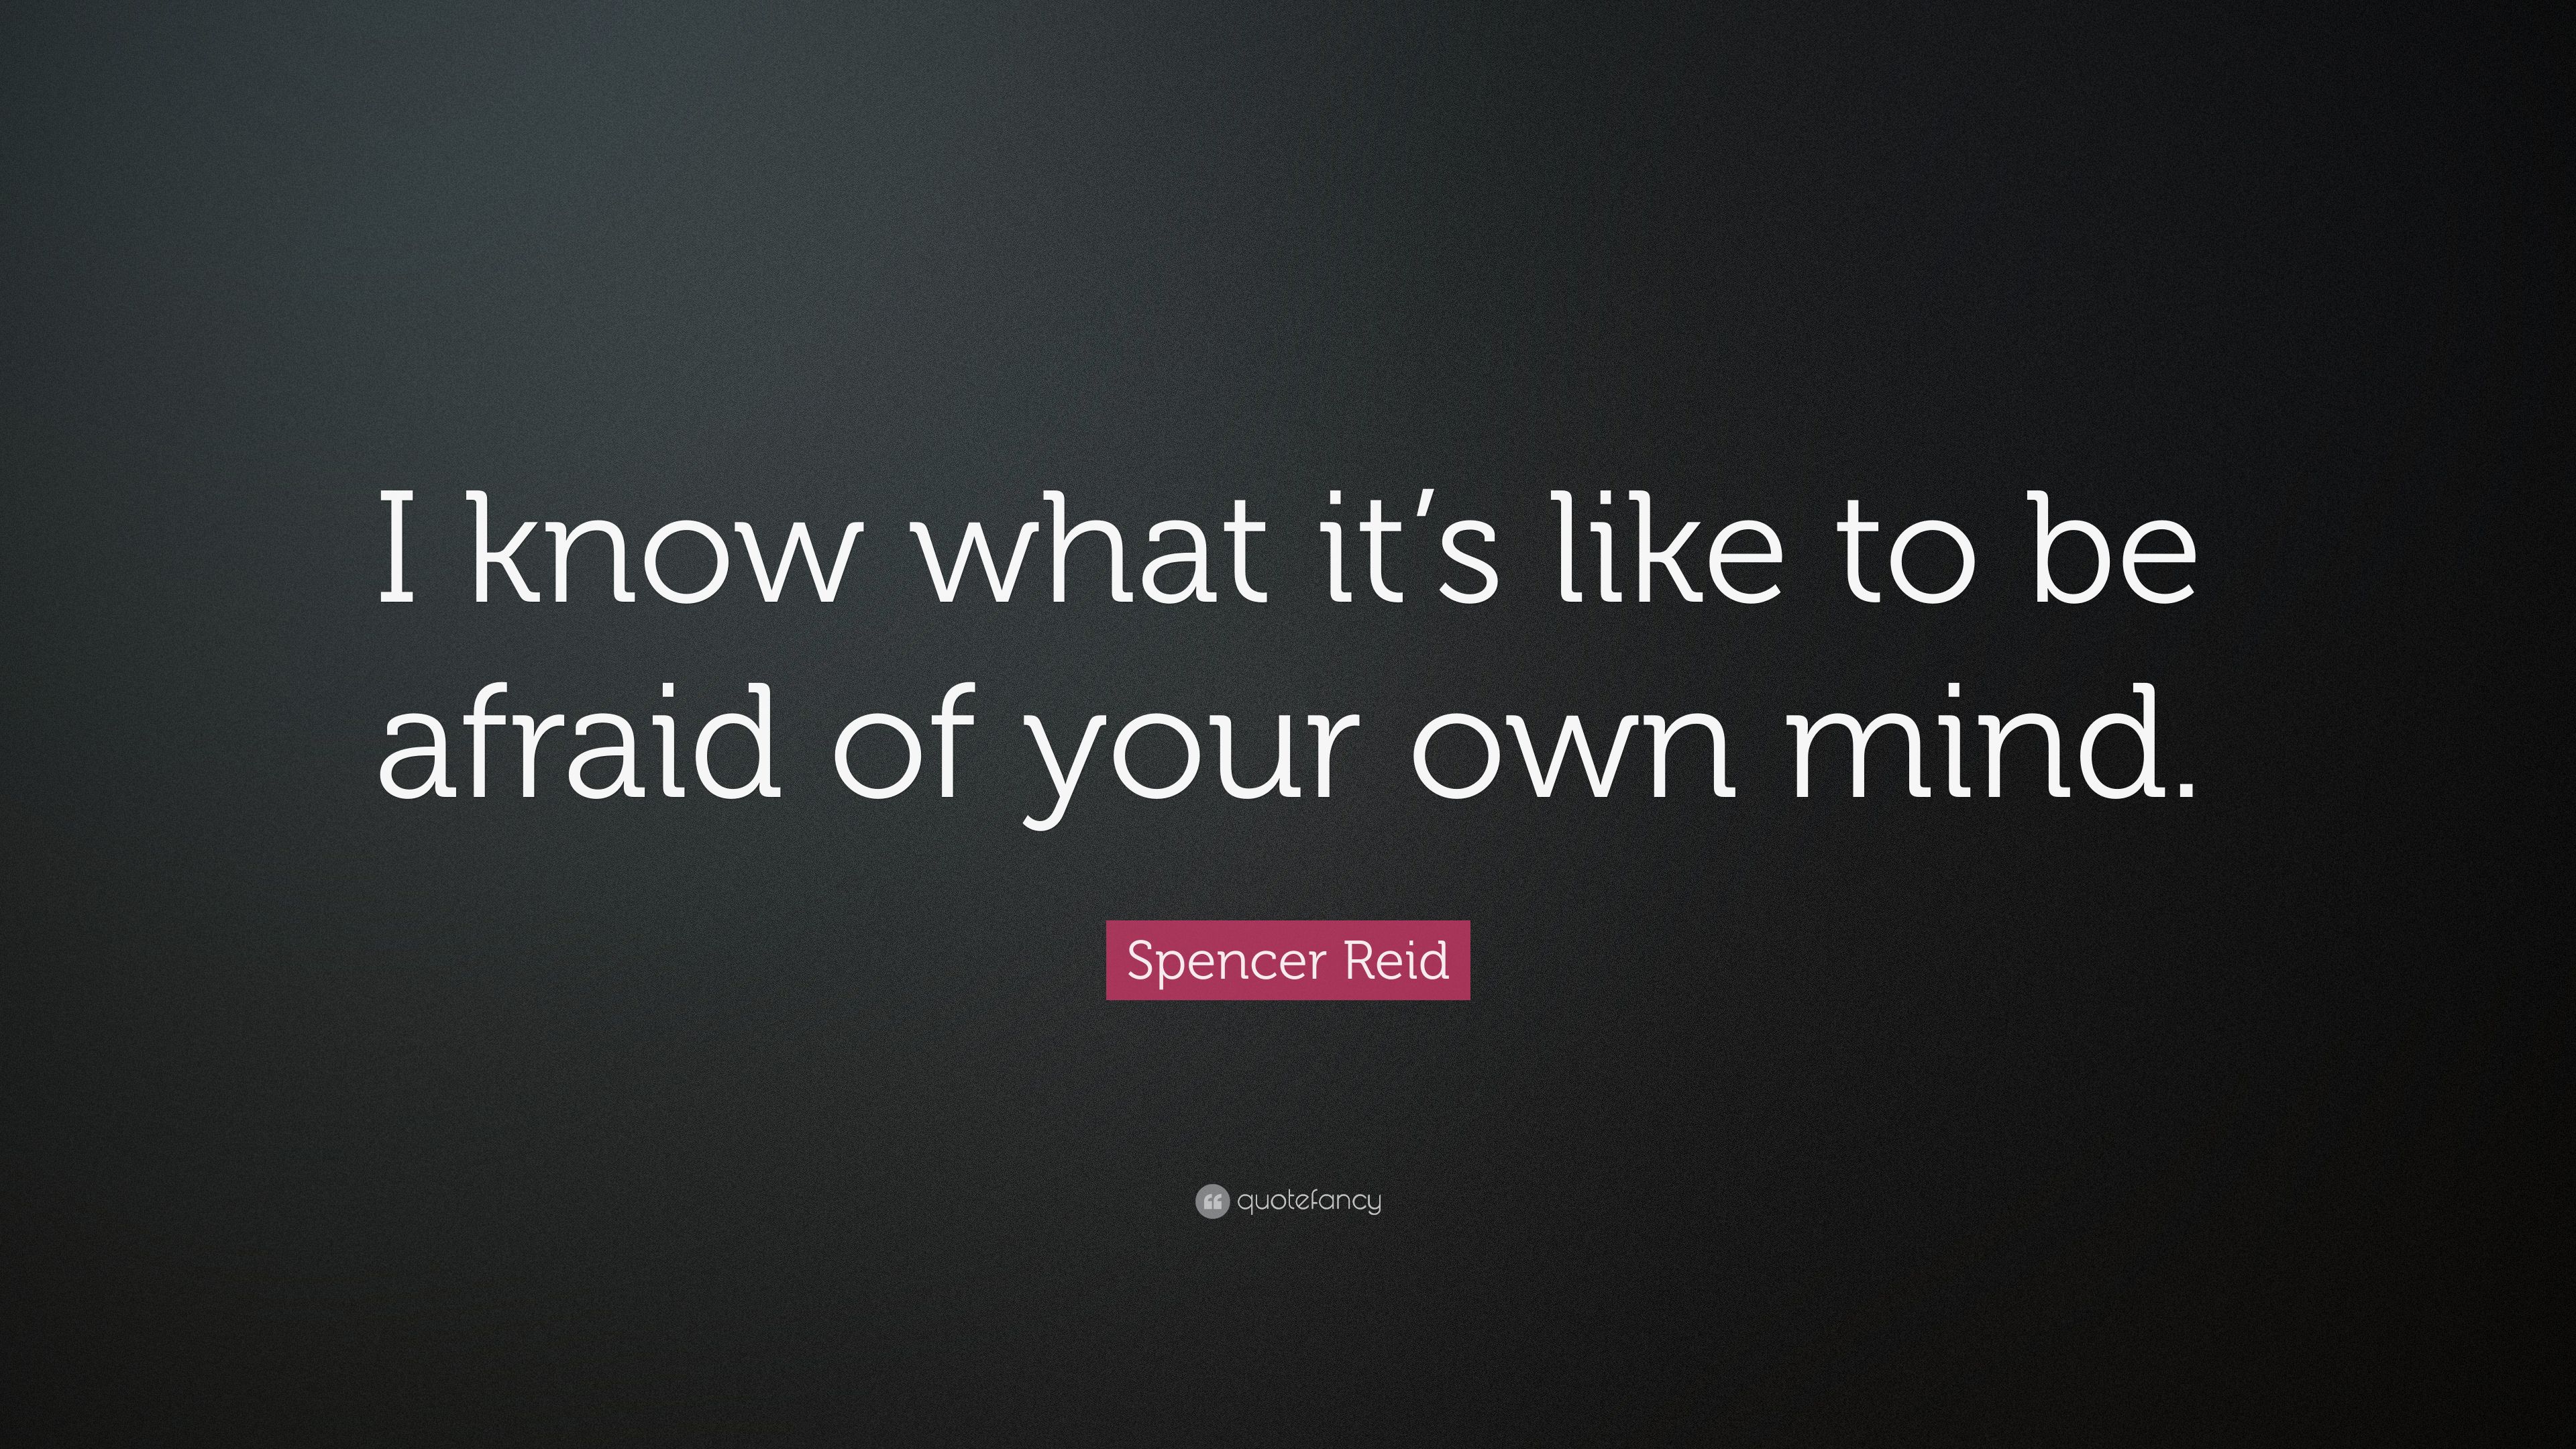 Spencer Reid Quote: “I know what it's like to be afraid of your